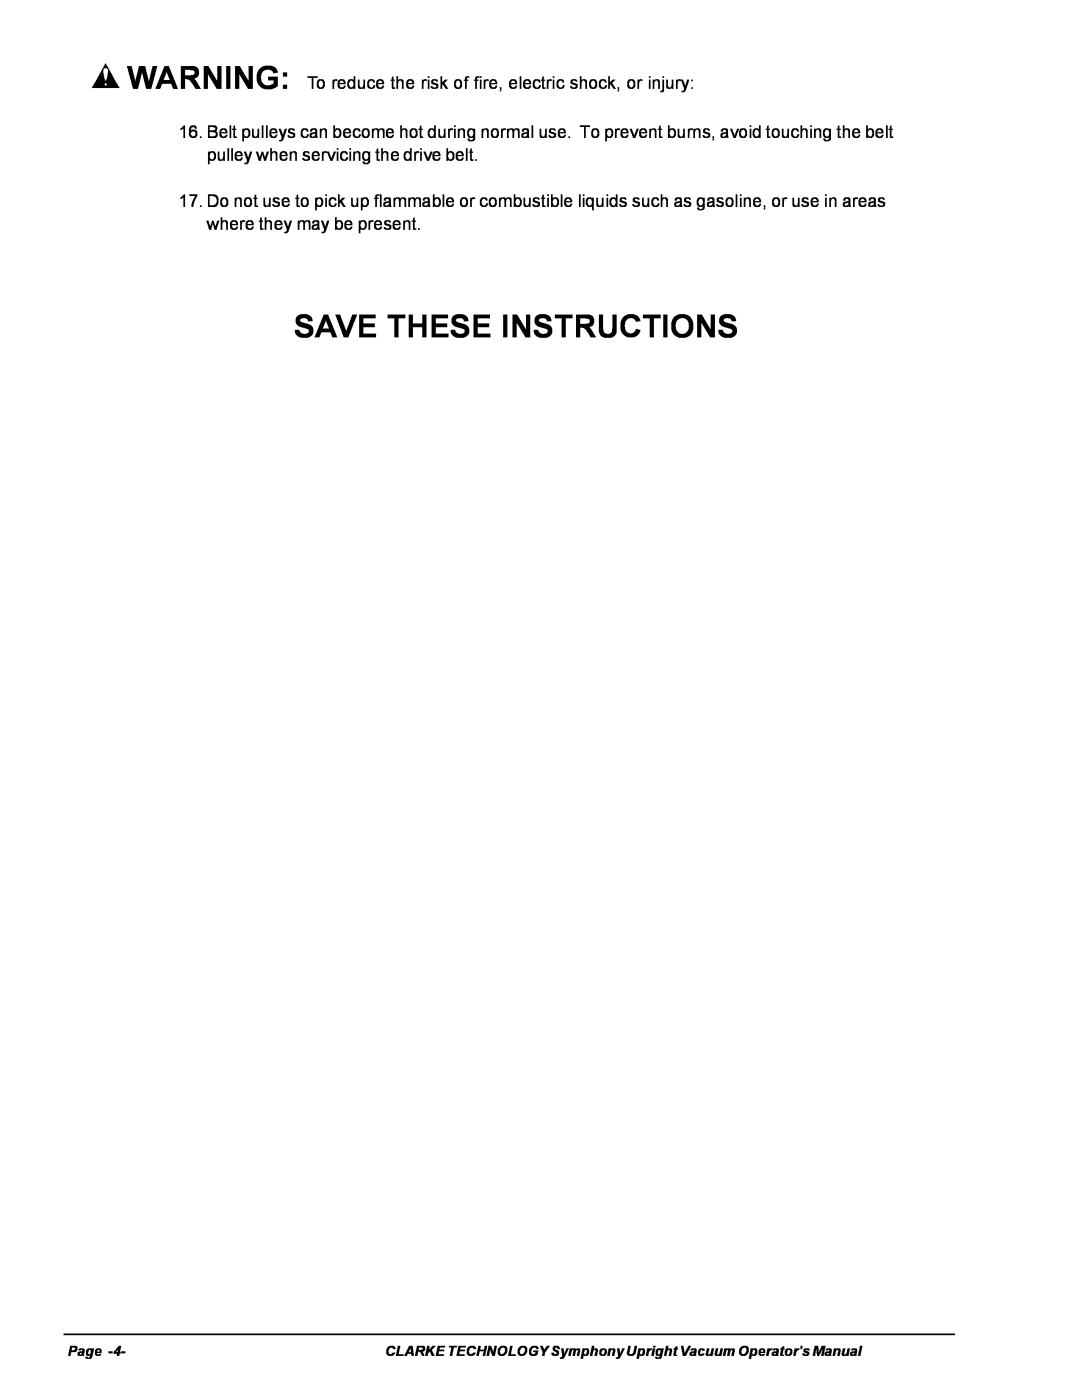 Nilfisk-ALTO S12cc, S16 manual Save These Instructions 